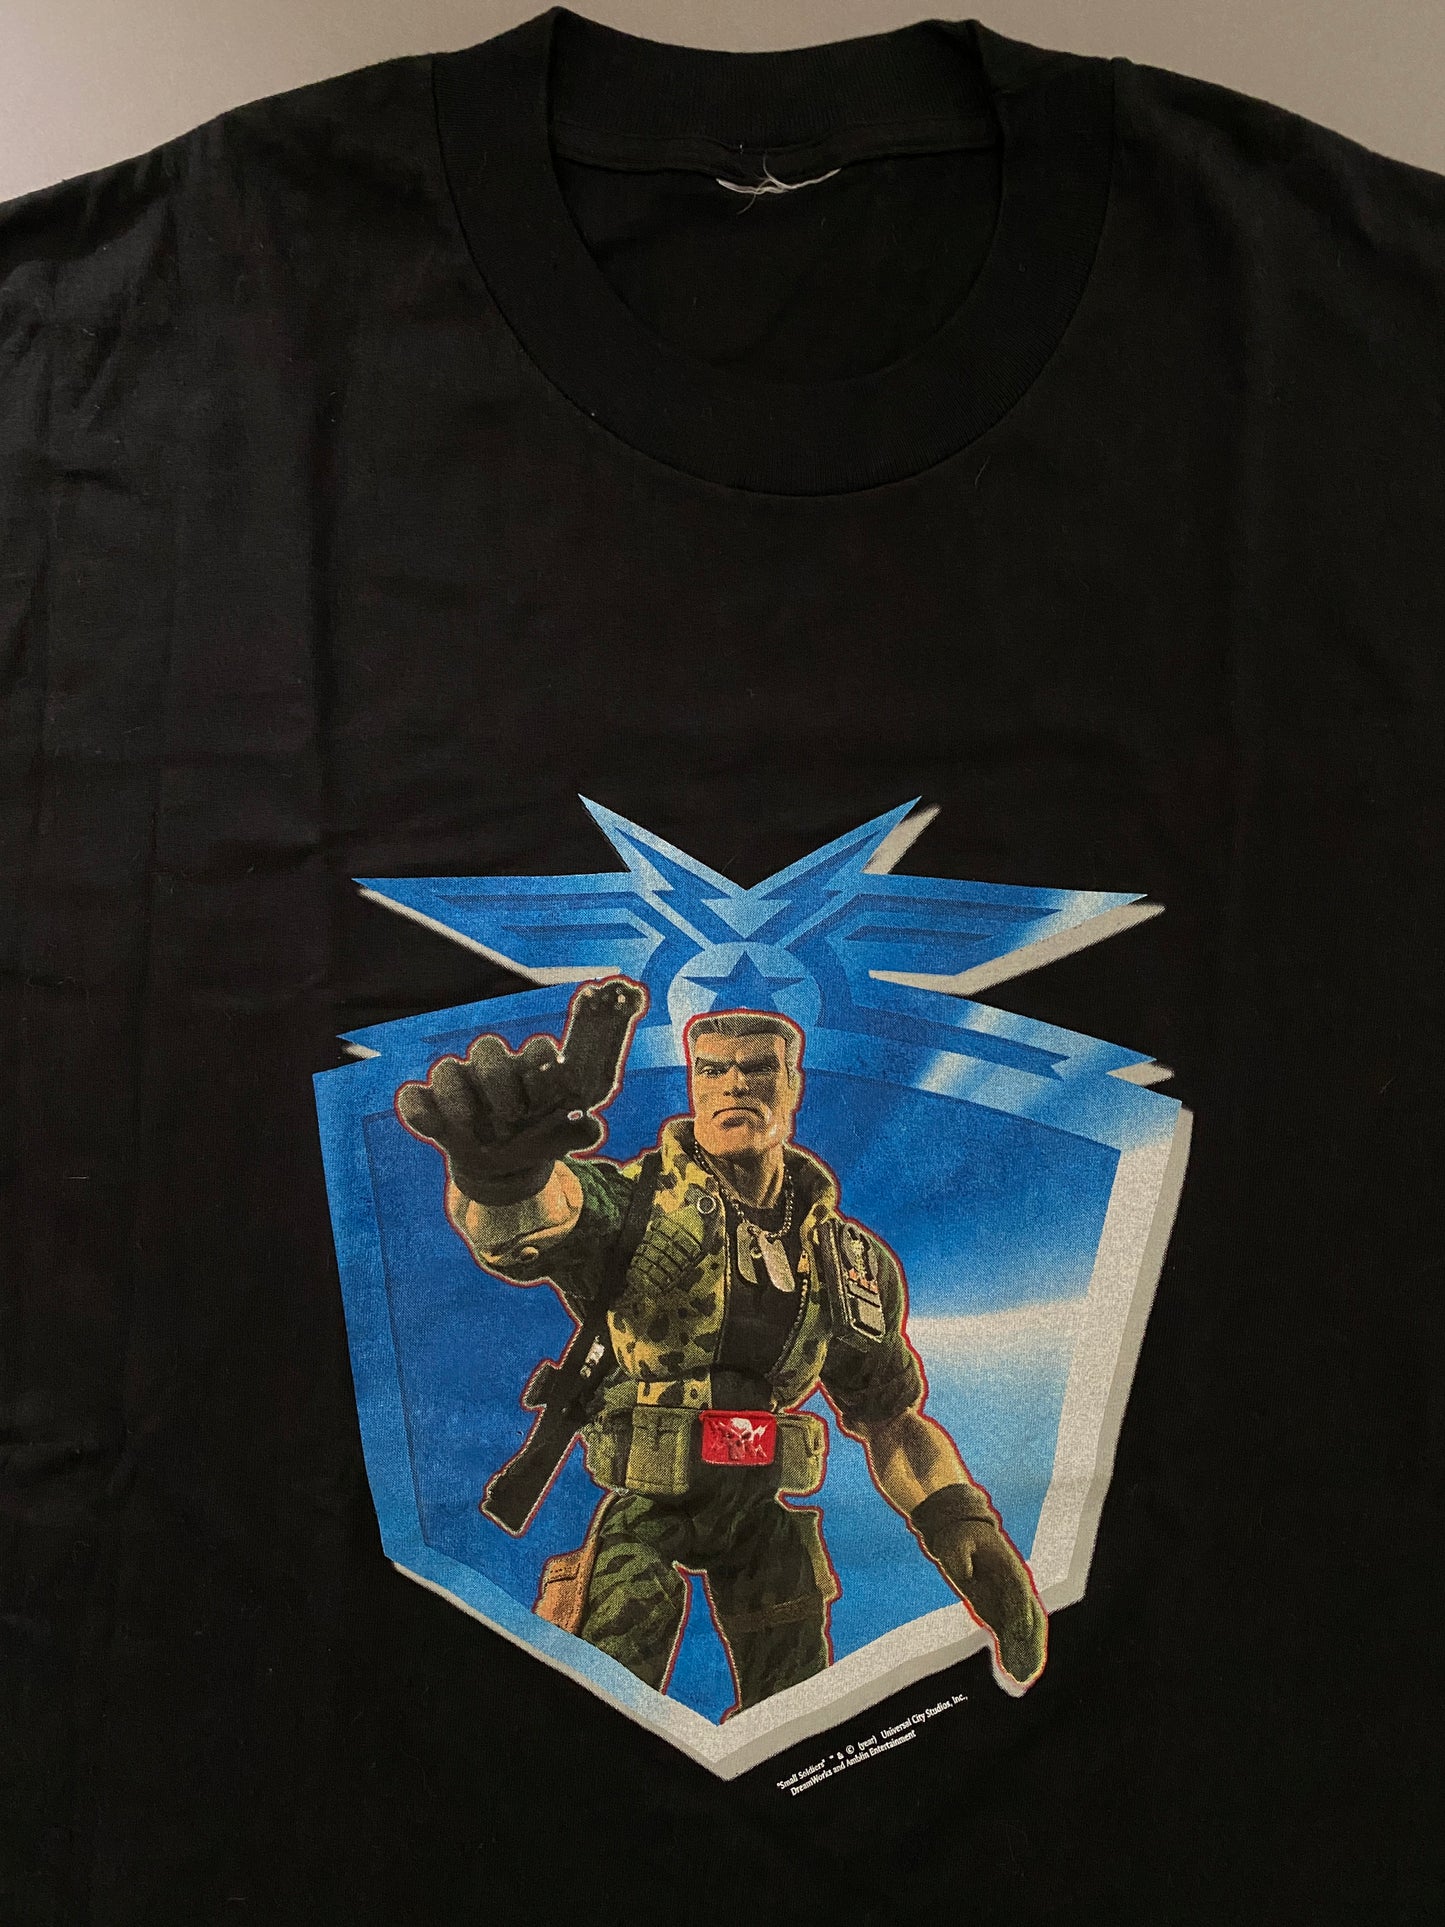 Small Soldiers T-shirt